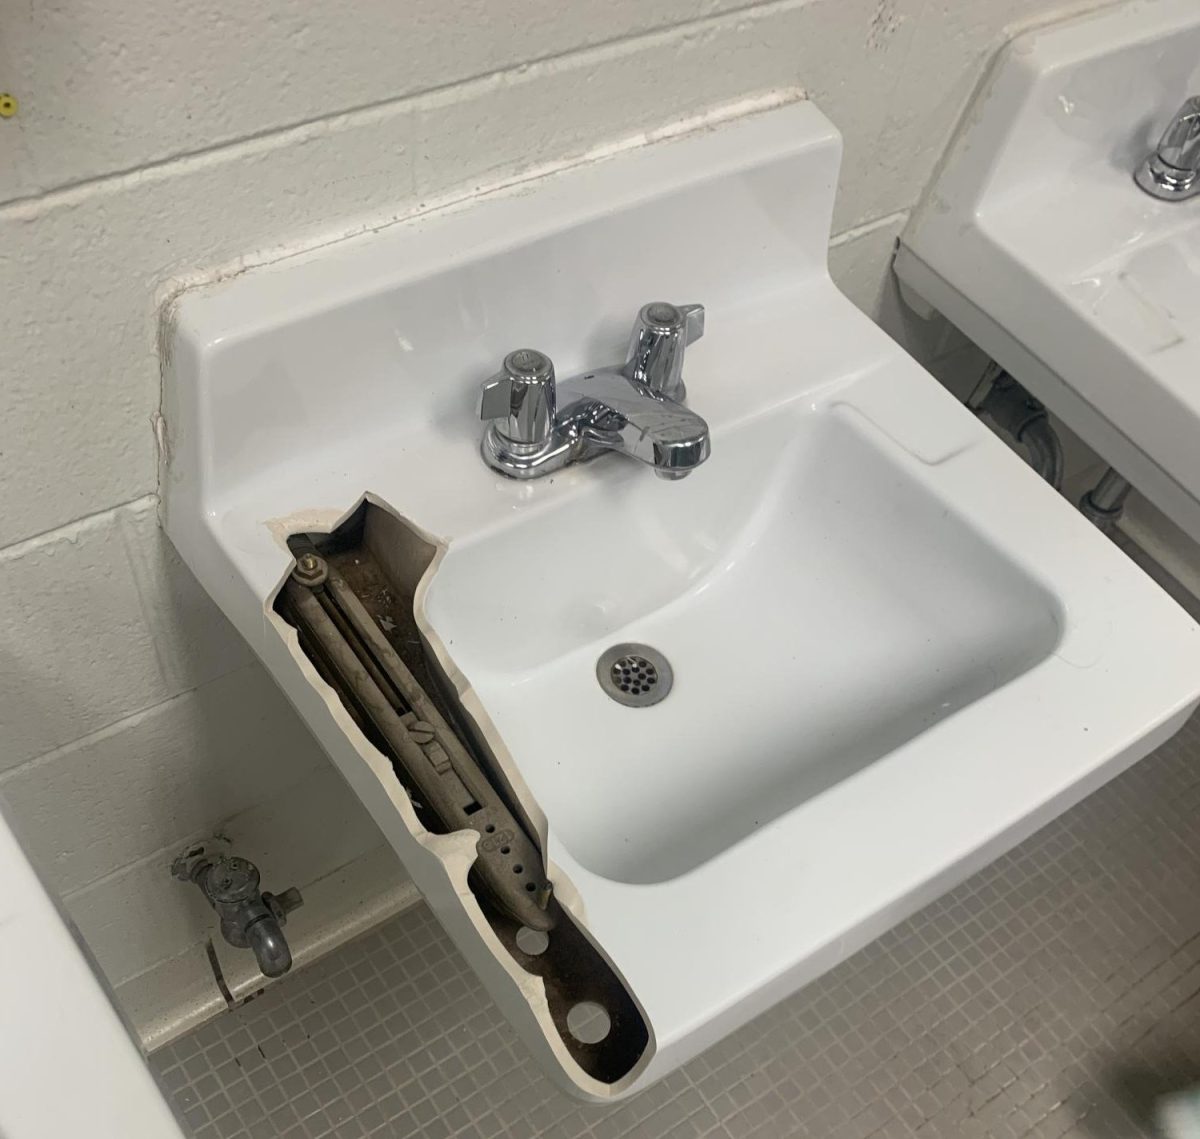 Students broke the sink in the girls bathroom during the school day.